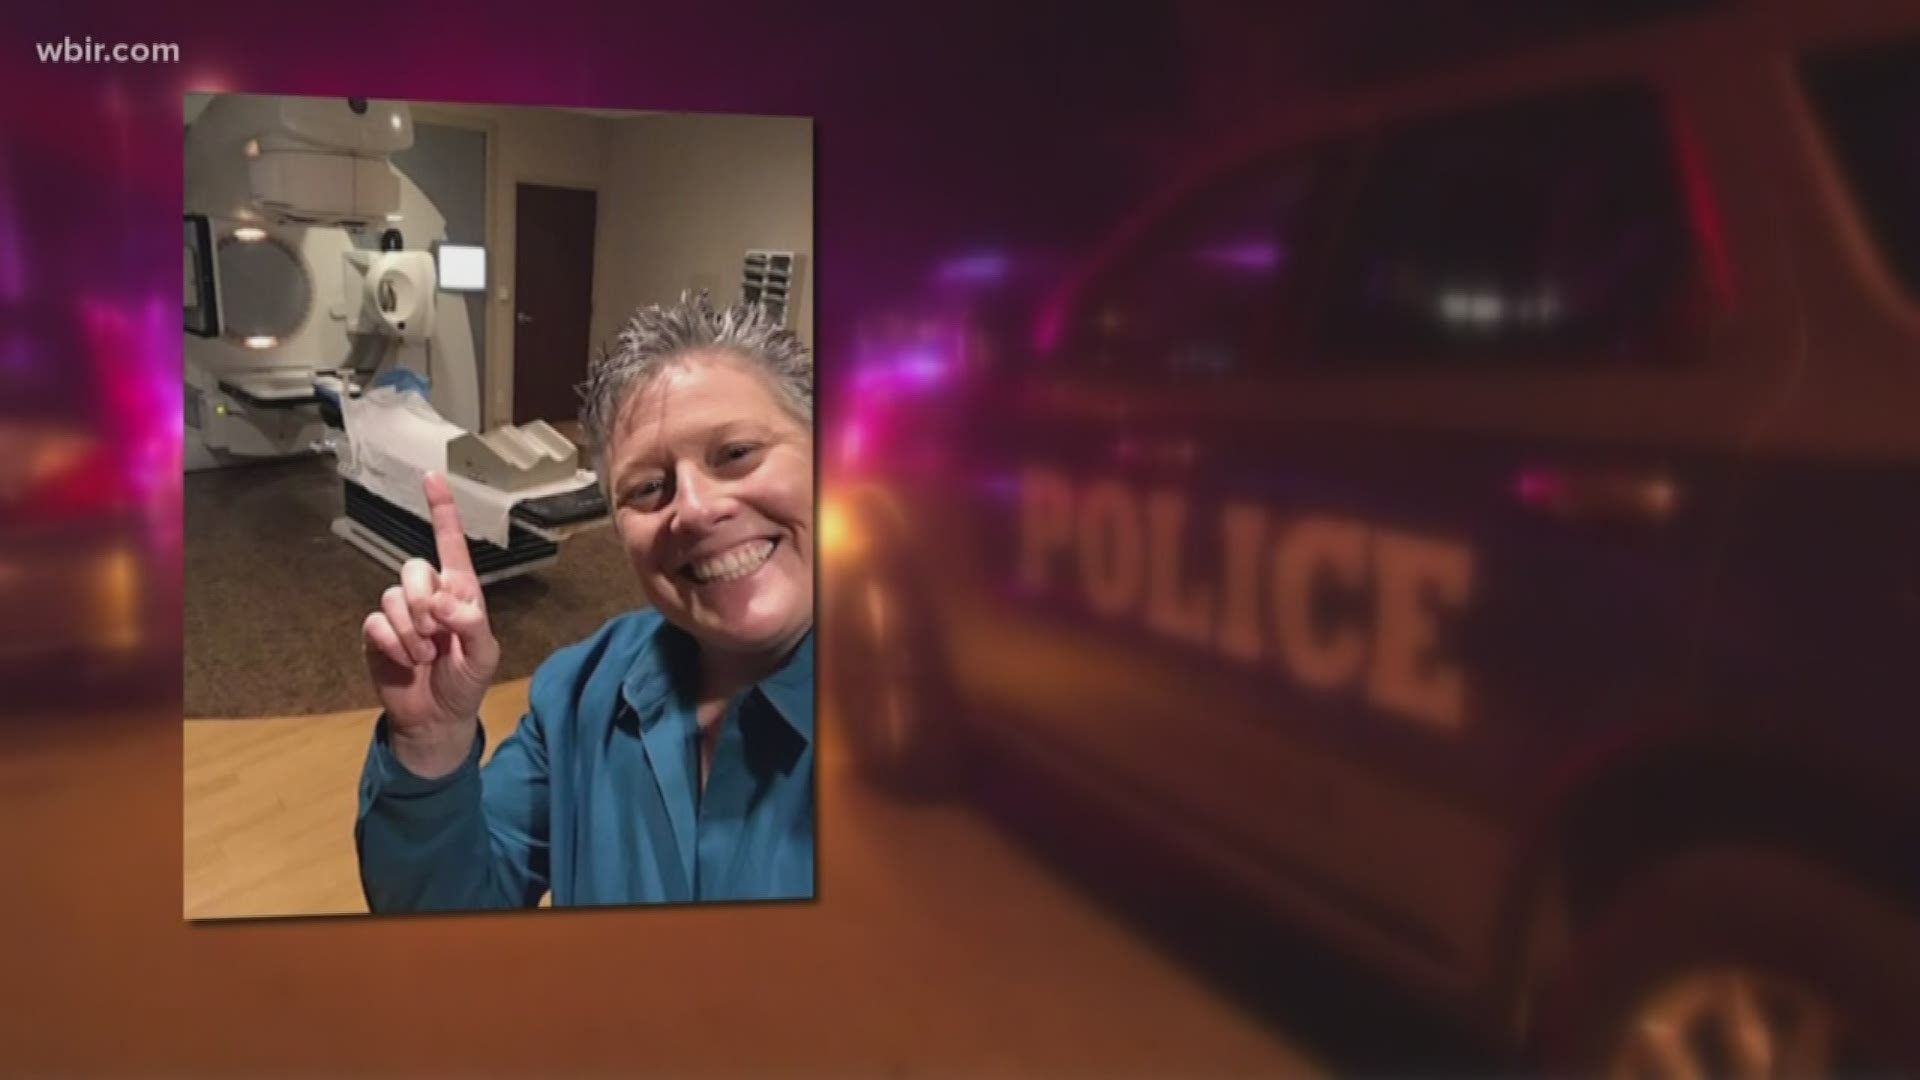 A Knoxville Police officer is sharing the importance of doing self-exams and mammograms.